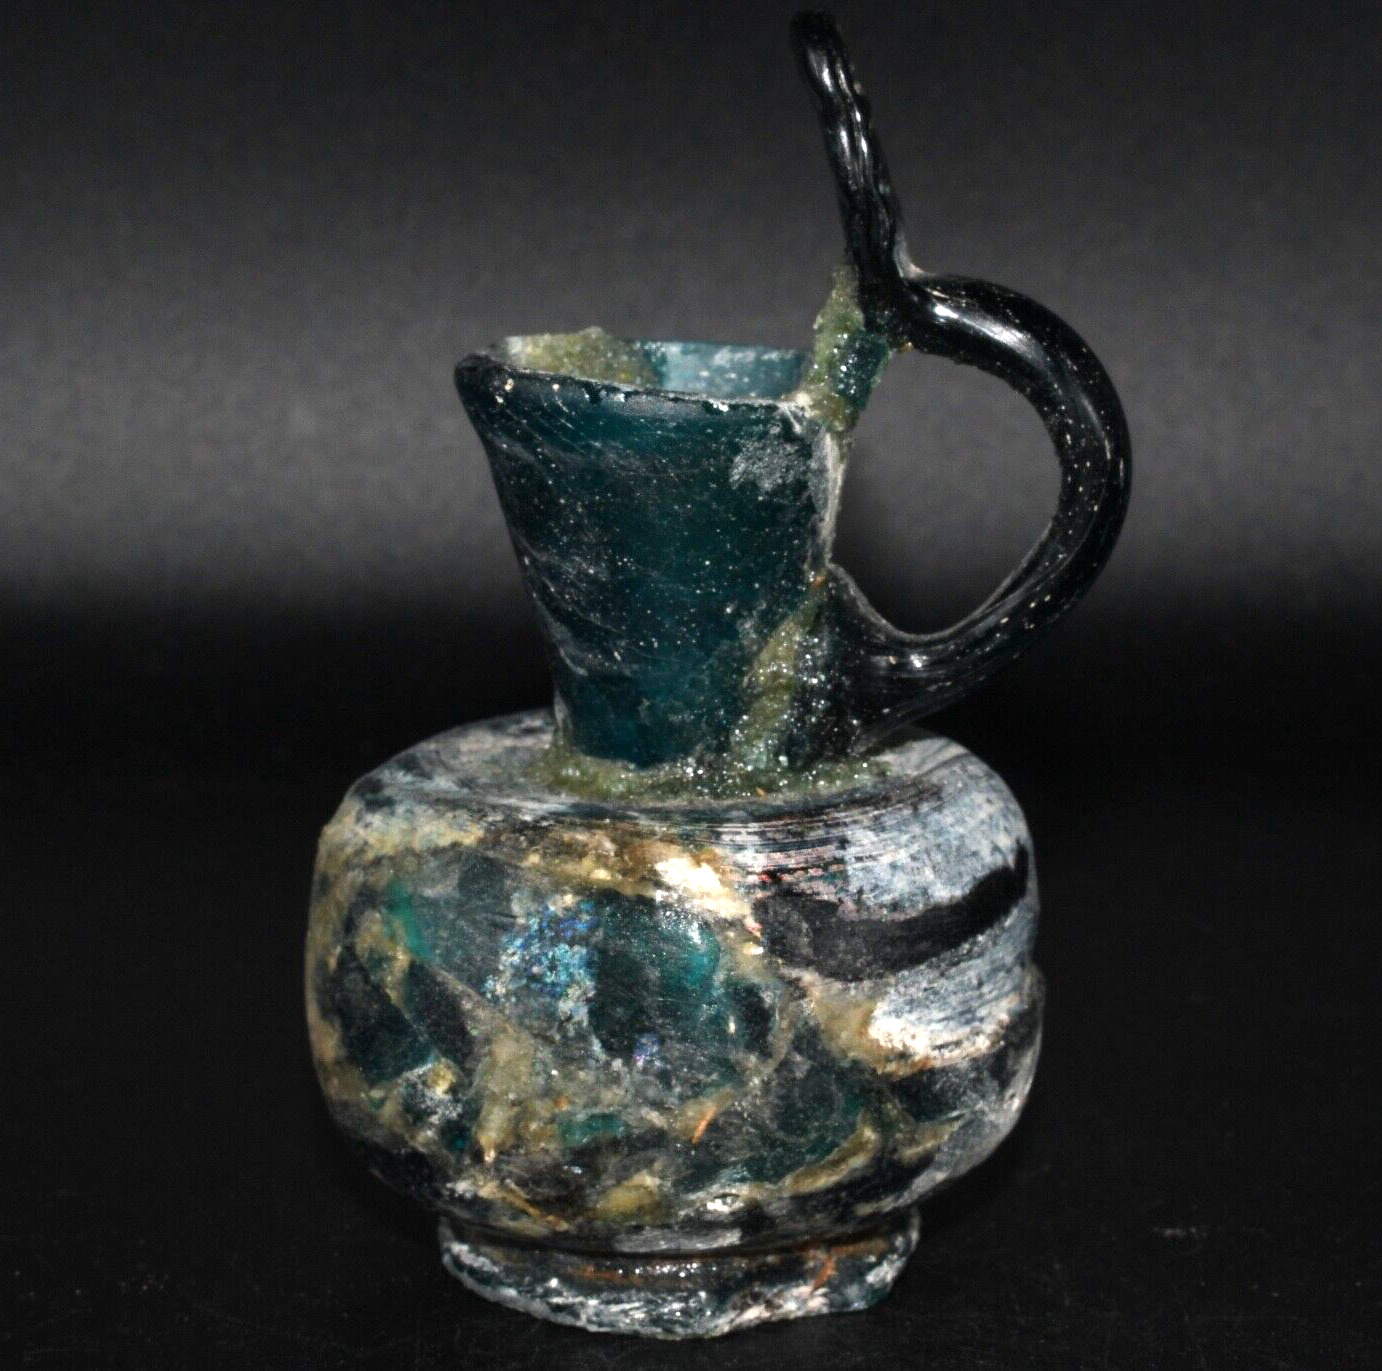 Authentic Ancient Roman Glass Jug Vessel from Middle East Ca. 1st - 3rd Century